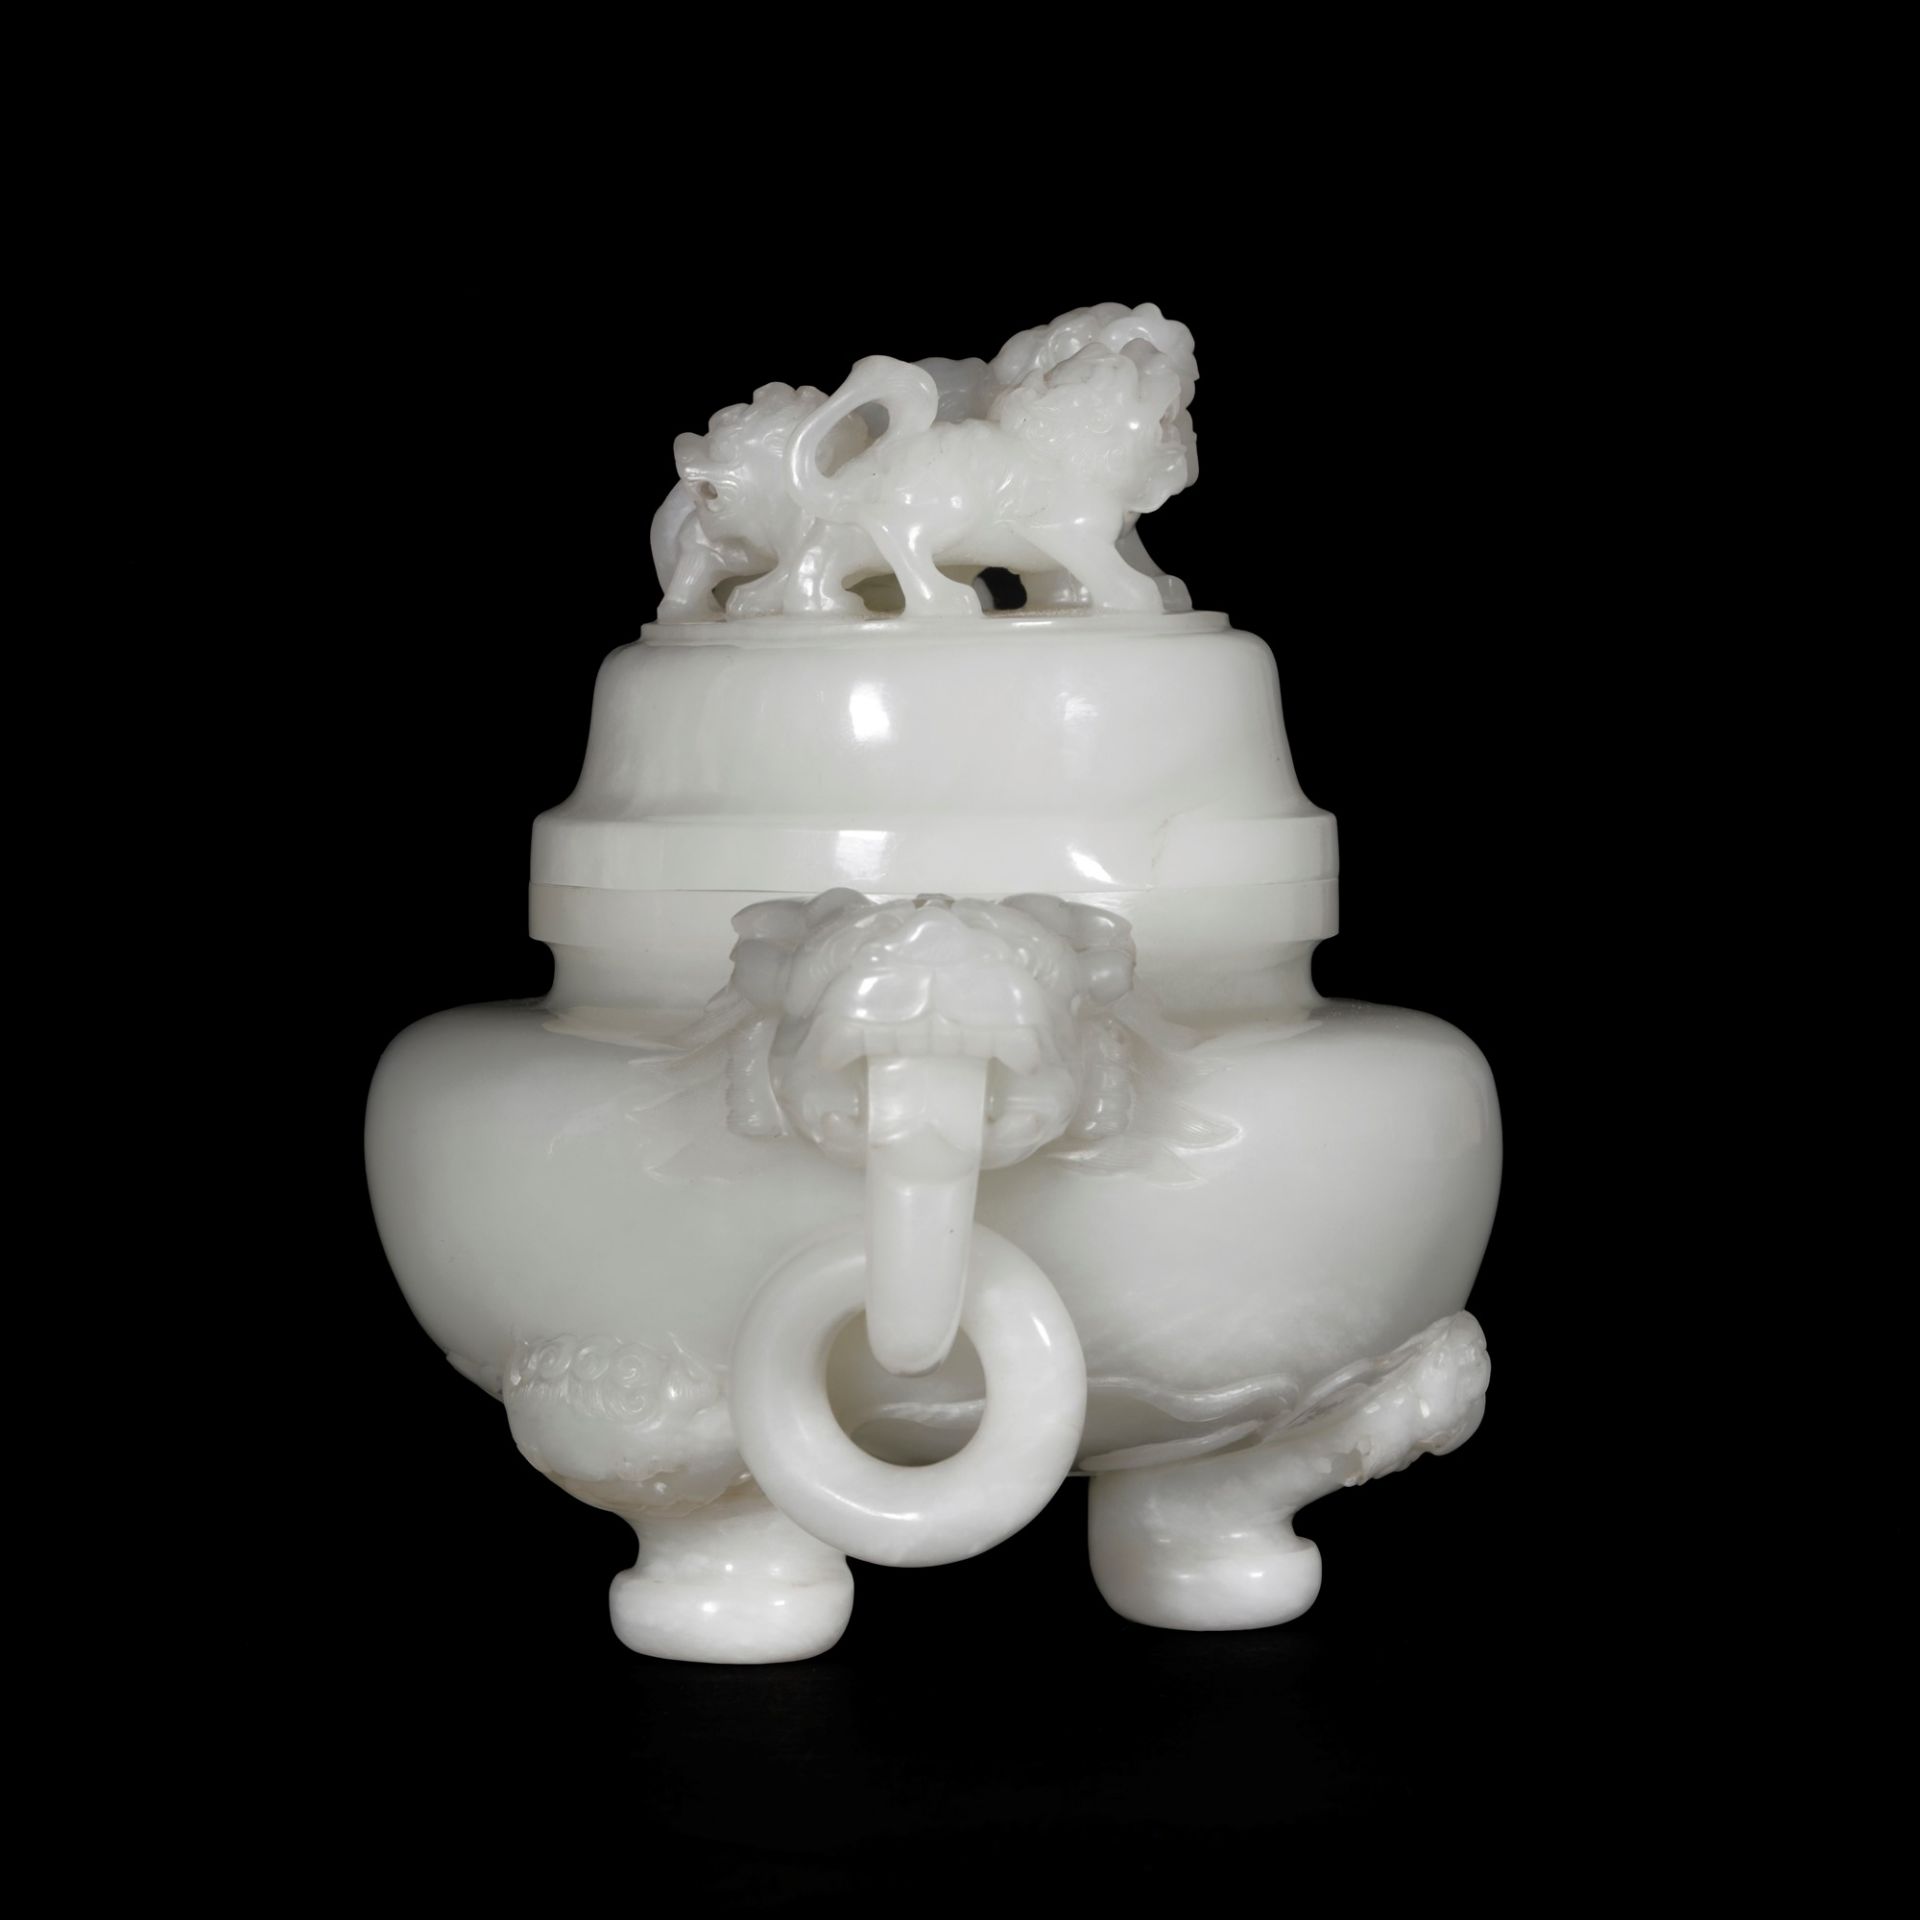 A FINE WHITE TRIP POD CENSER AND COVER, China, Qing dynasty, 19th century - Image 3 of 10